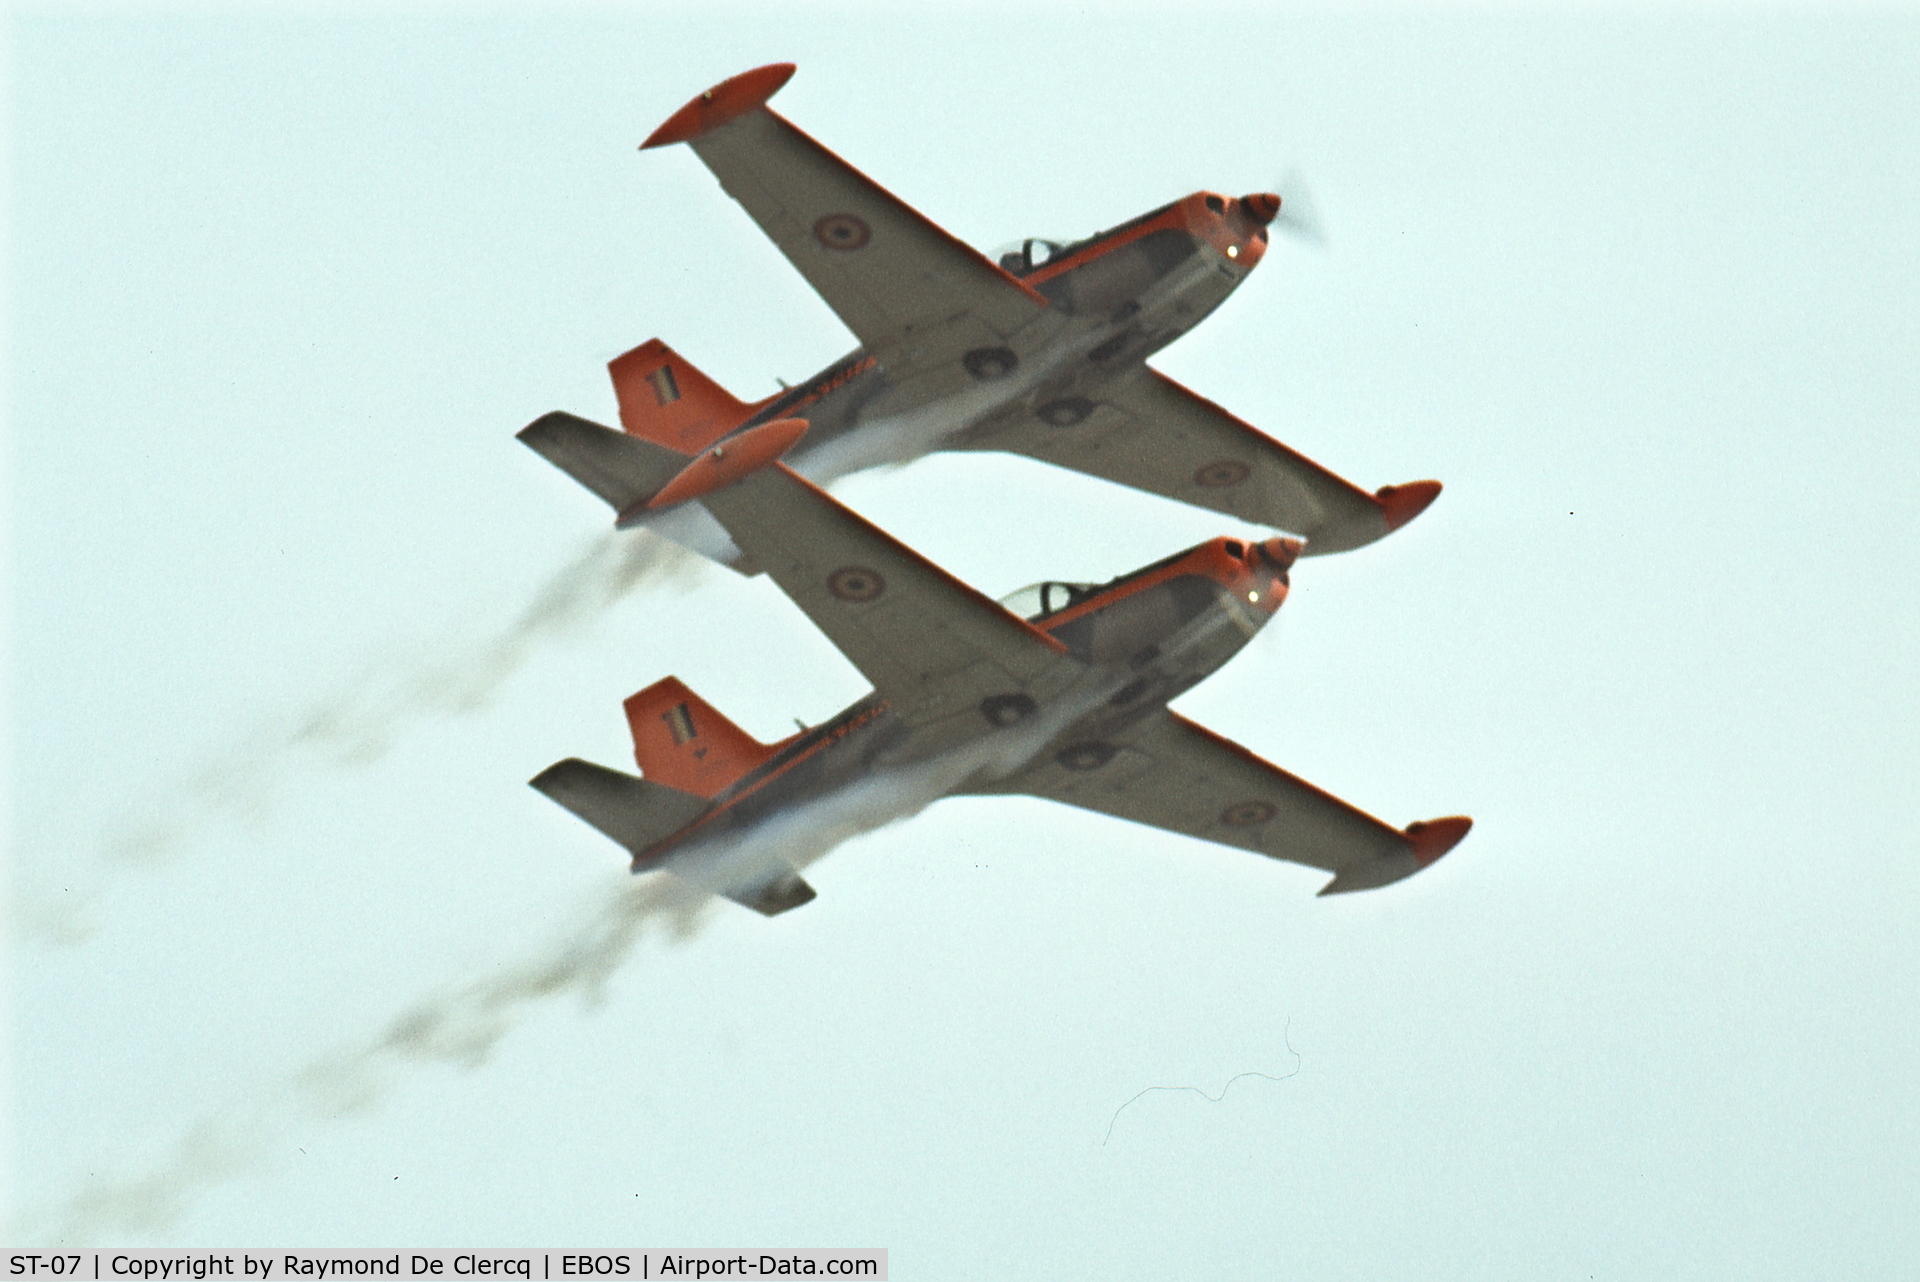 ST-07, SIAI-Marchetti SF-260MB C/N 10-07, In formation with ST-36 at an airshow in mid-seventies.